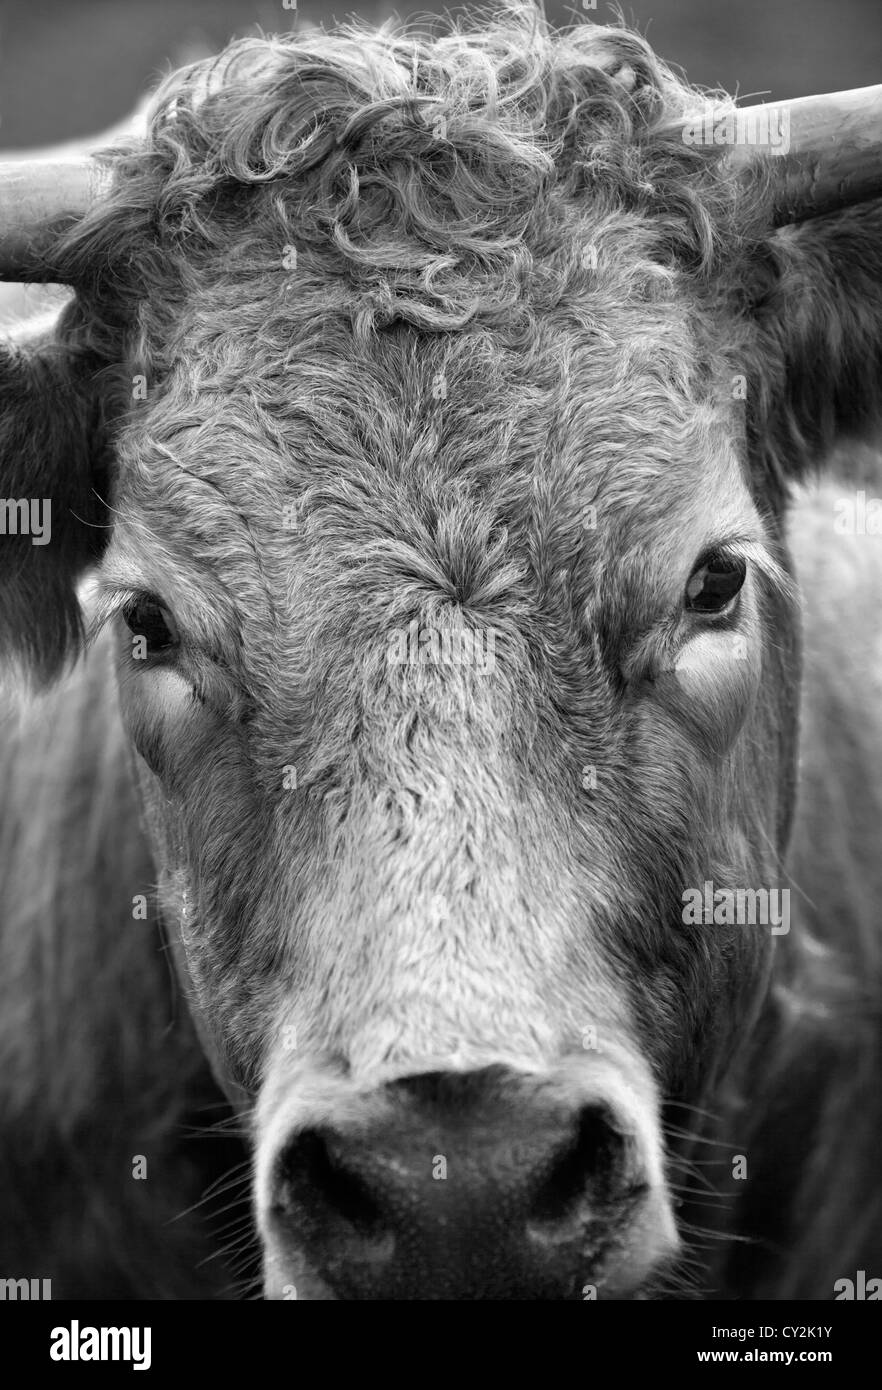 Bull Head Black and White Stock Photos & Images - Alamy